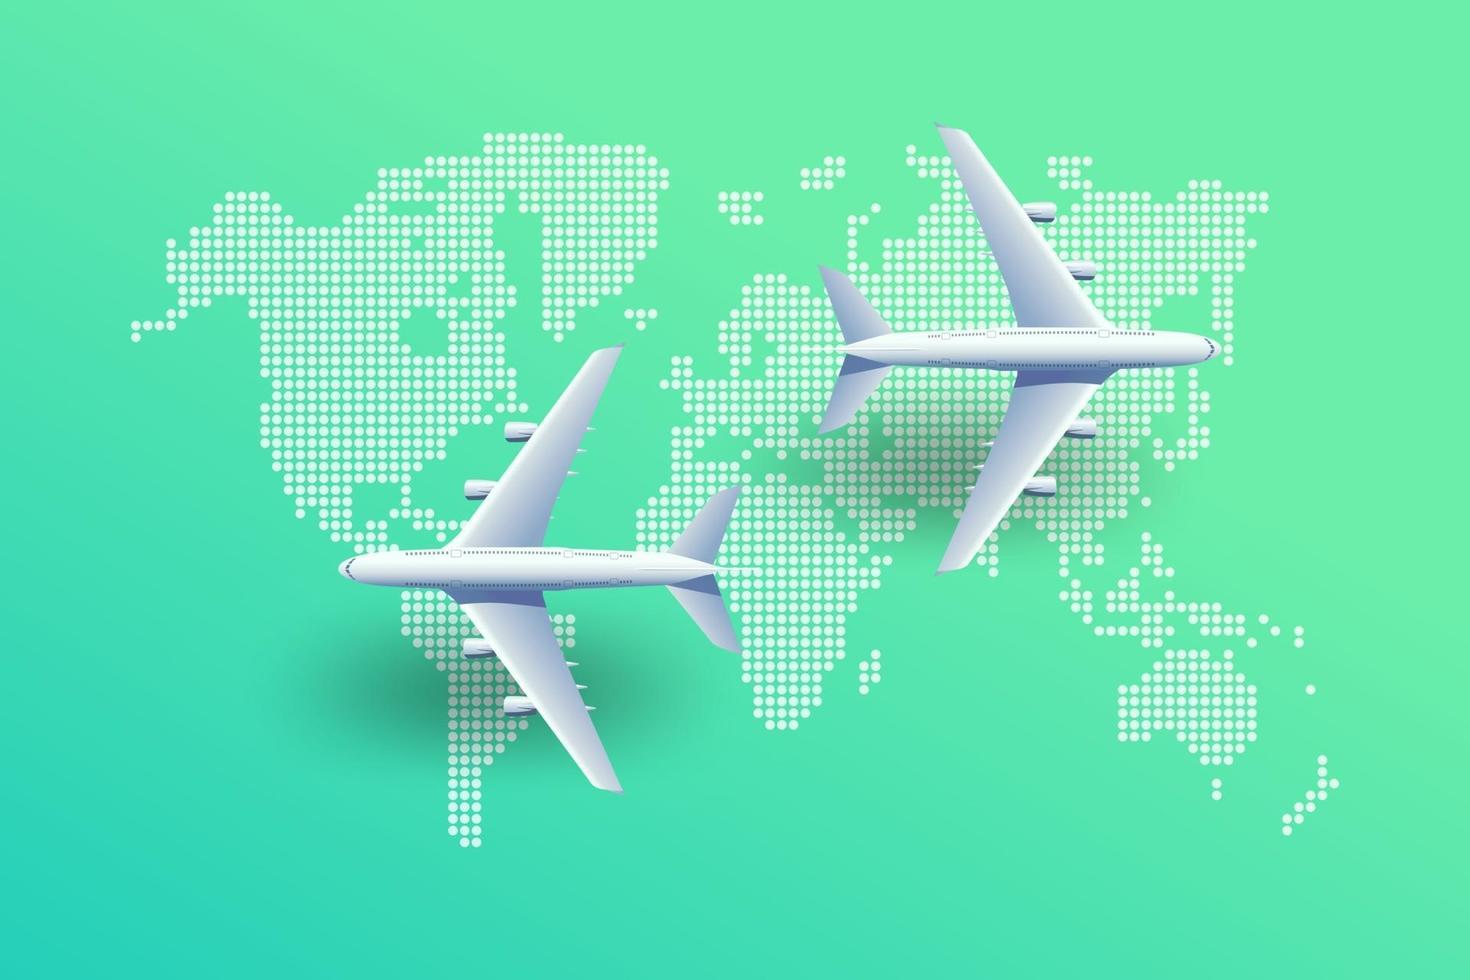 Planes over world map. Airplane flying above world map. vector